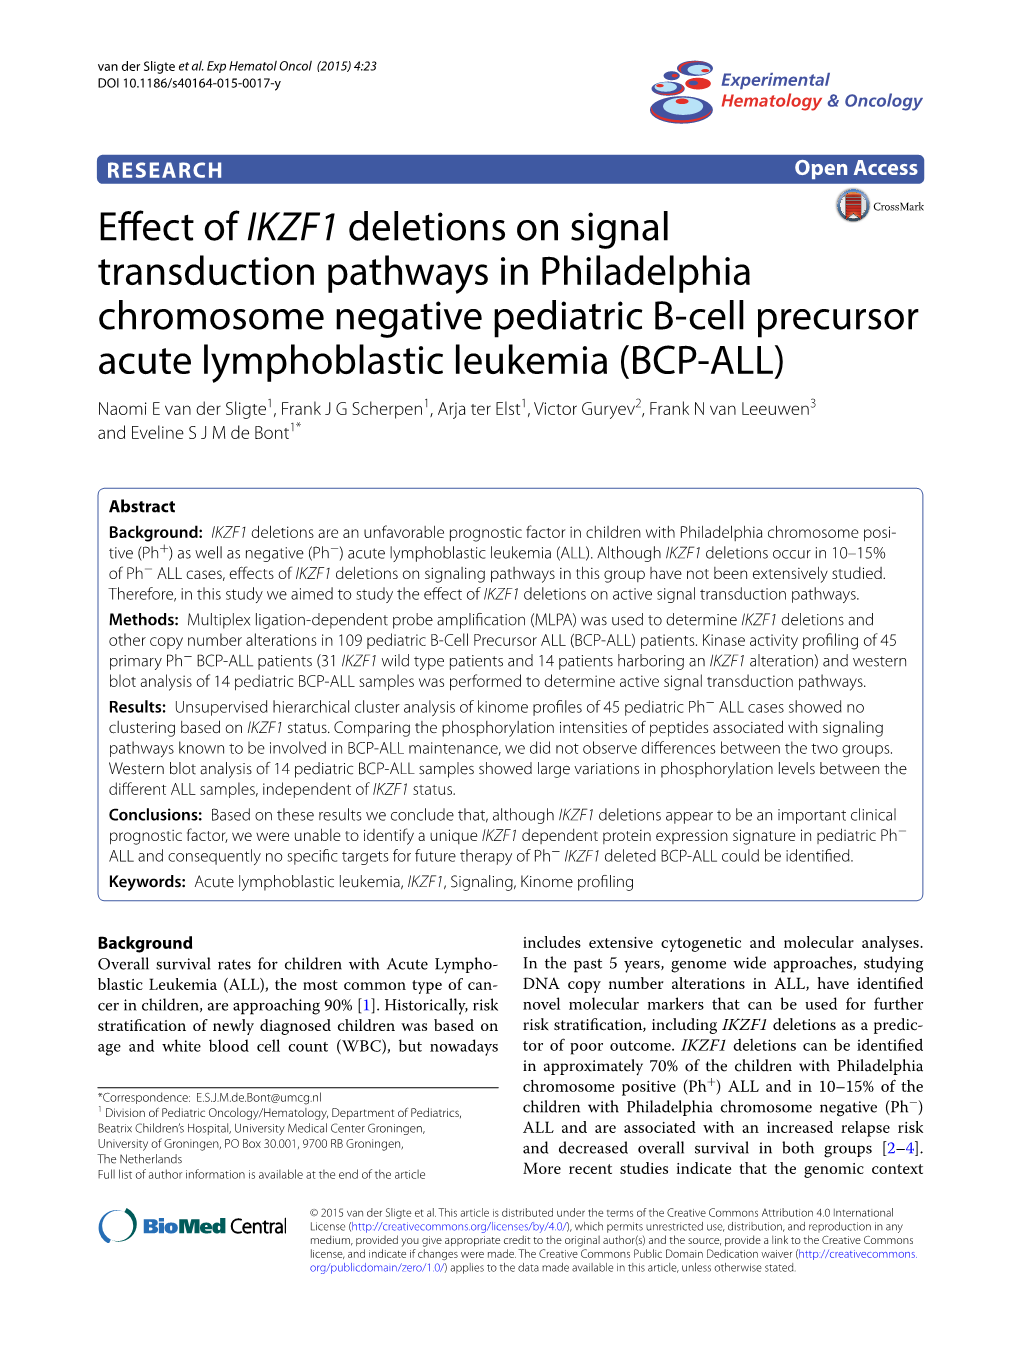 Effect of IKZF1 Deletions on Signal Transduction Pathways In